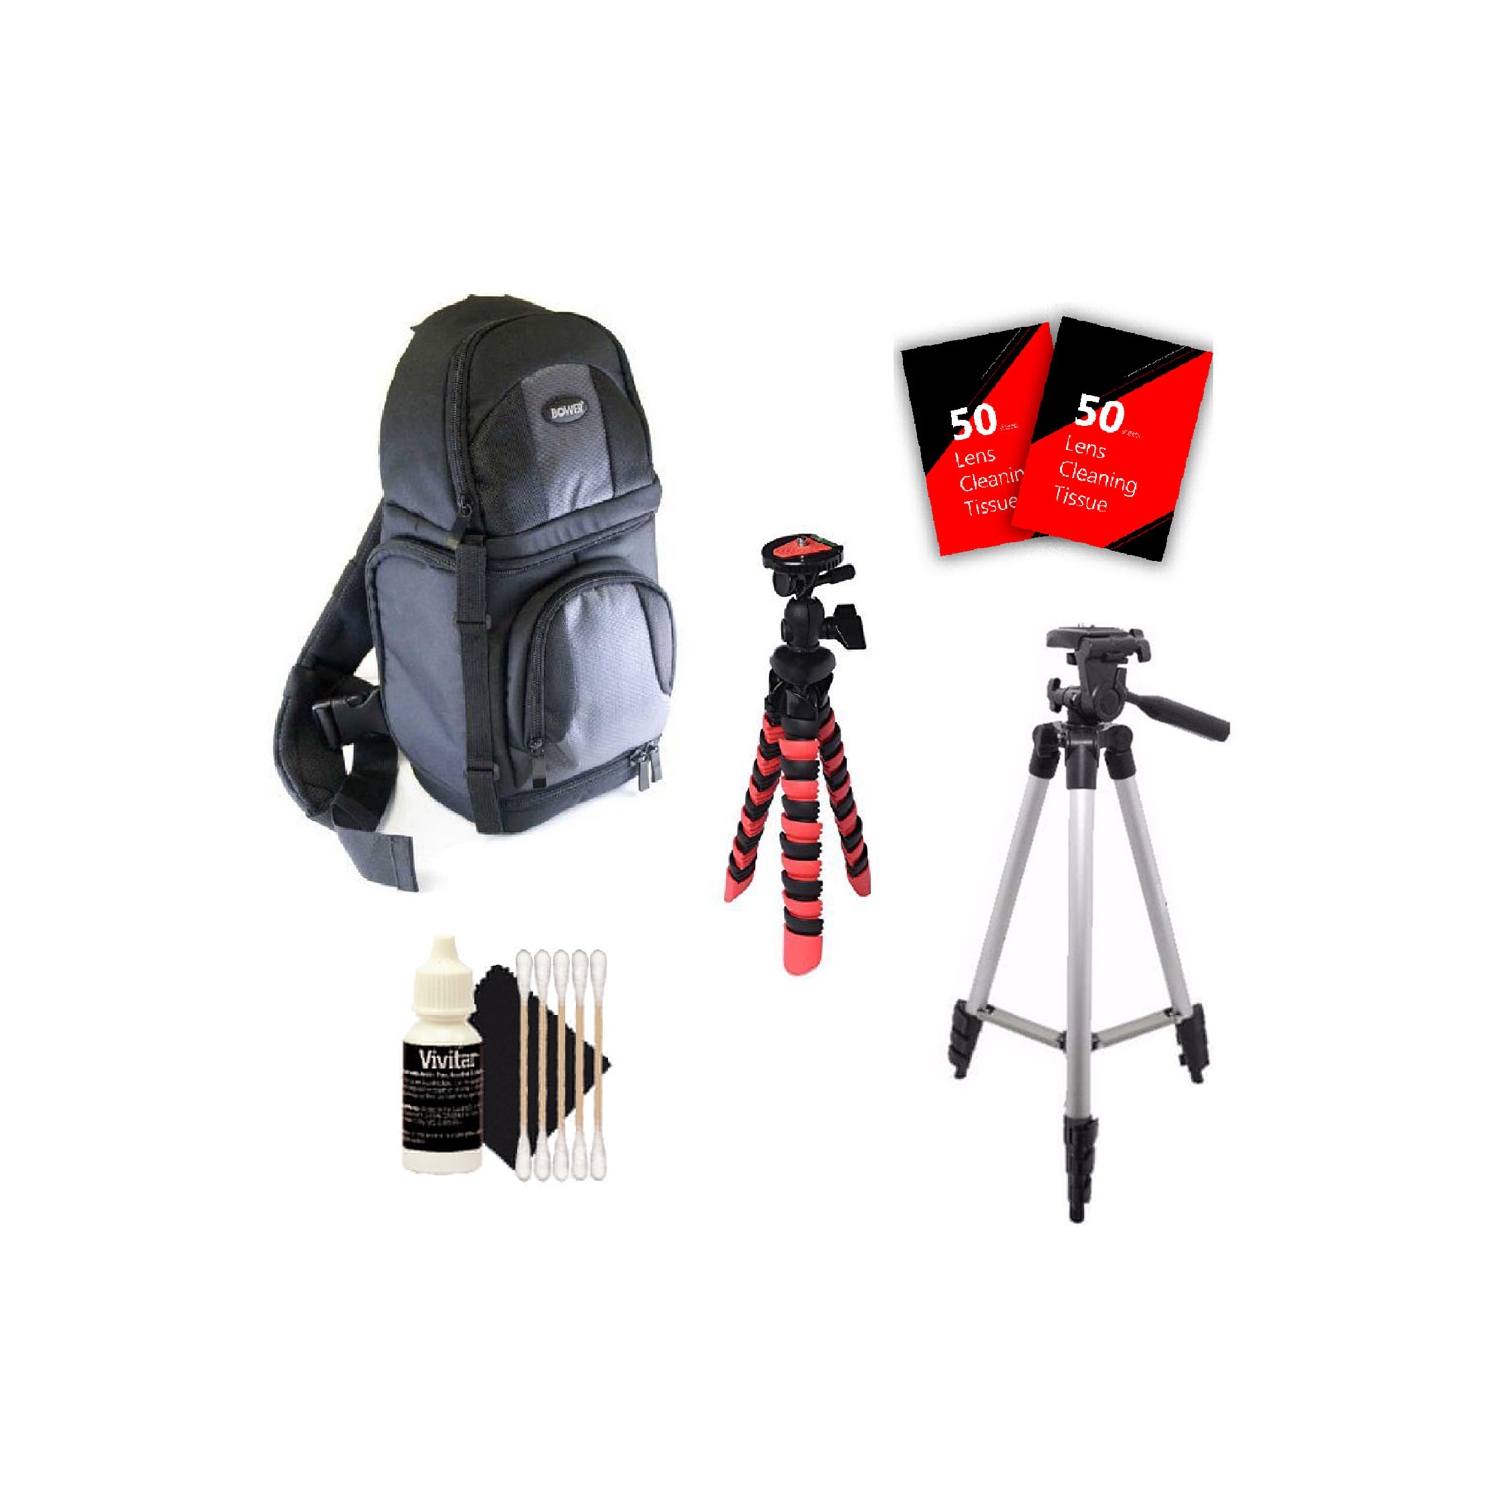 Tall Tripod, Flexible Tripod Backpack and More for Canon Eos Rebel 70D 80D T6 T6i T5 and All Digital Cameras